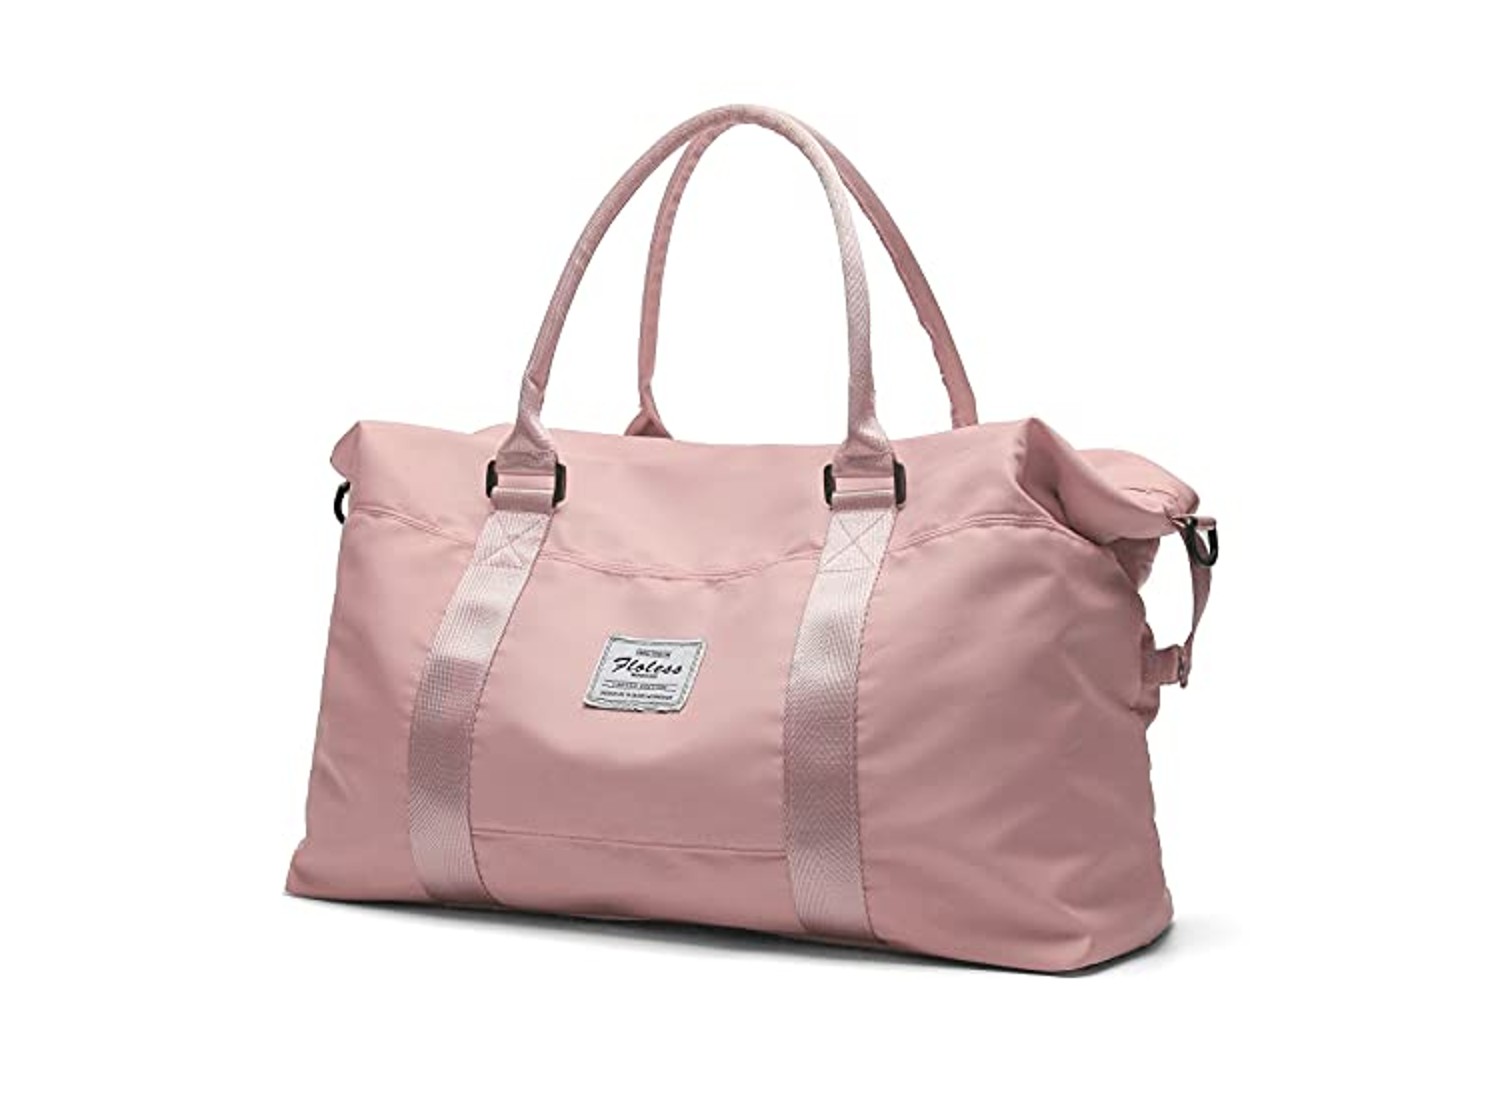 Women's gym bags: 15 best gym bags for women to buy in 2022